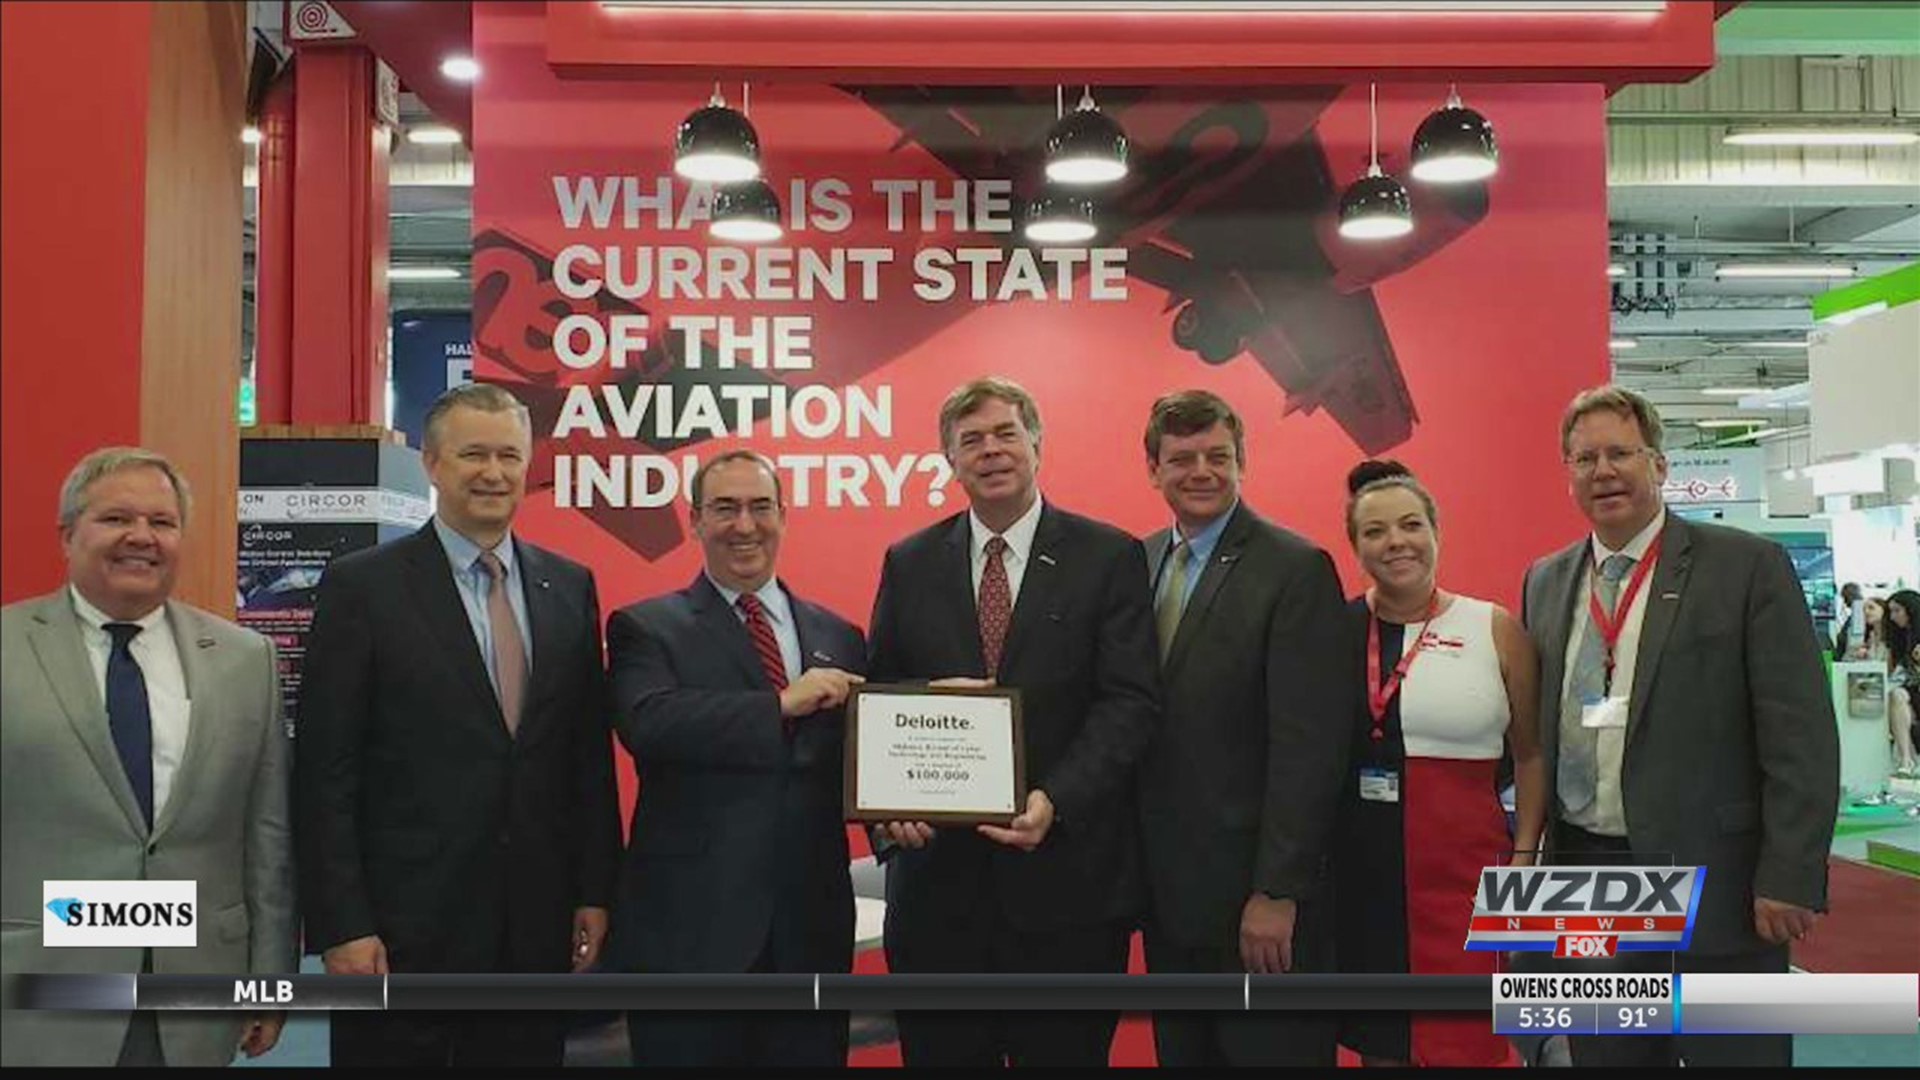 During a ceremony at the Paris Air Show, Deloitte presented a $100,000 gift to the Alabama school of Cyber Technology and Engineering Foundation.